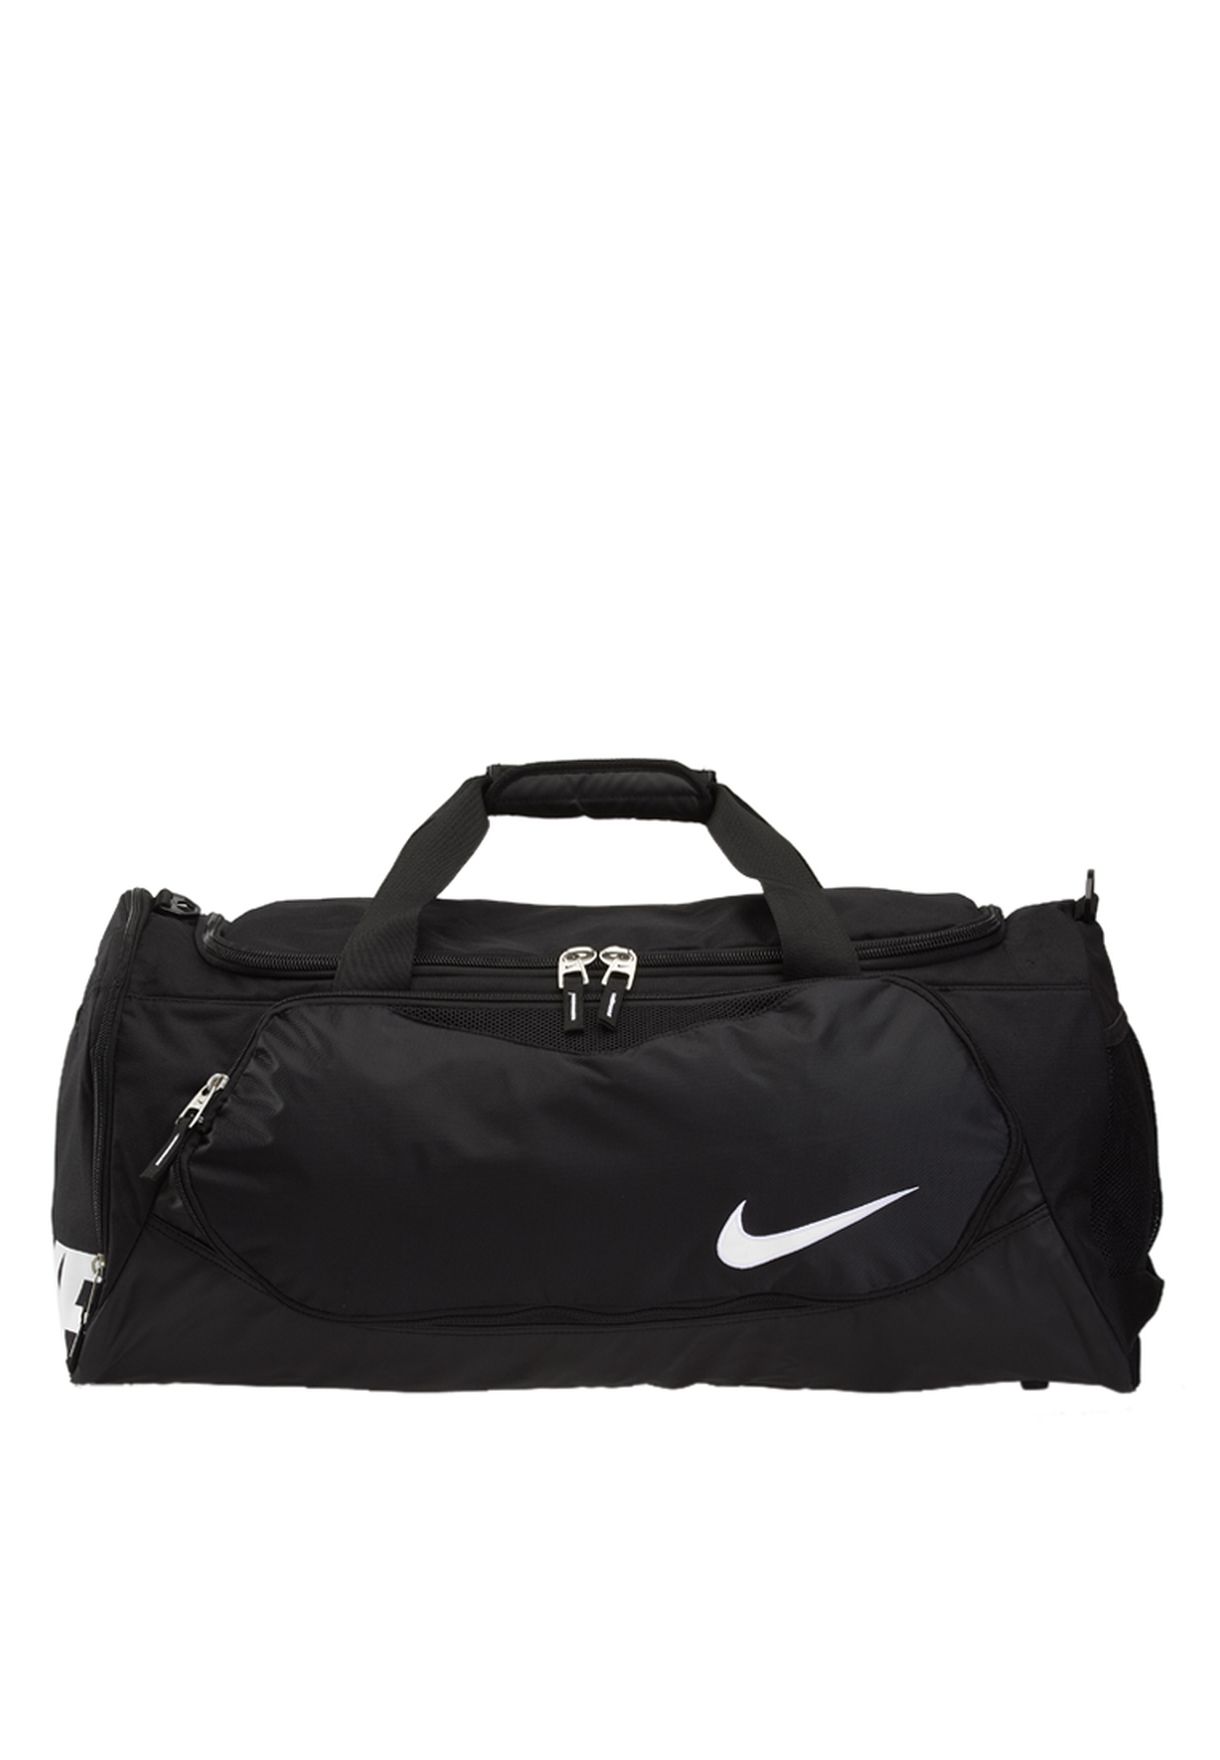 Nike Sports Bags For Men